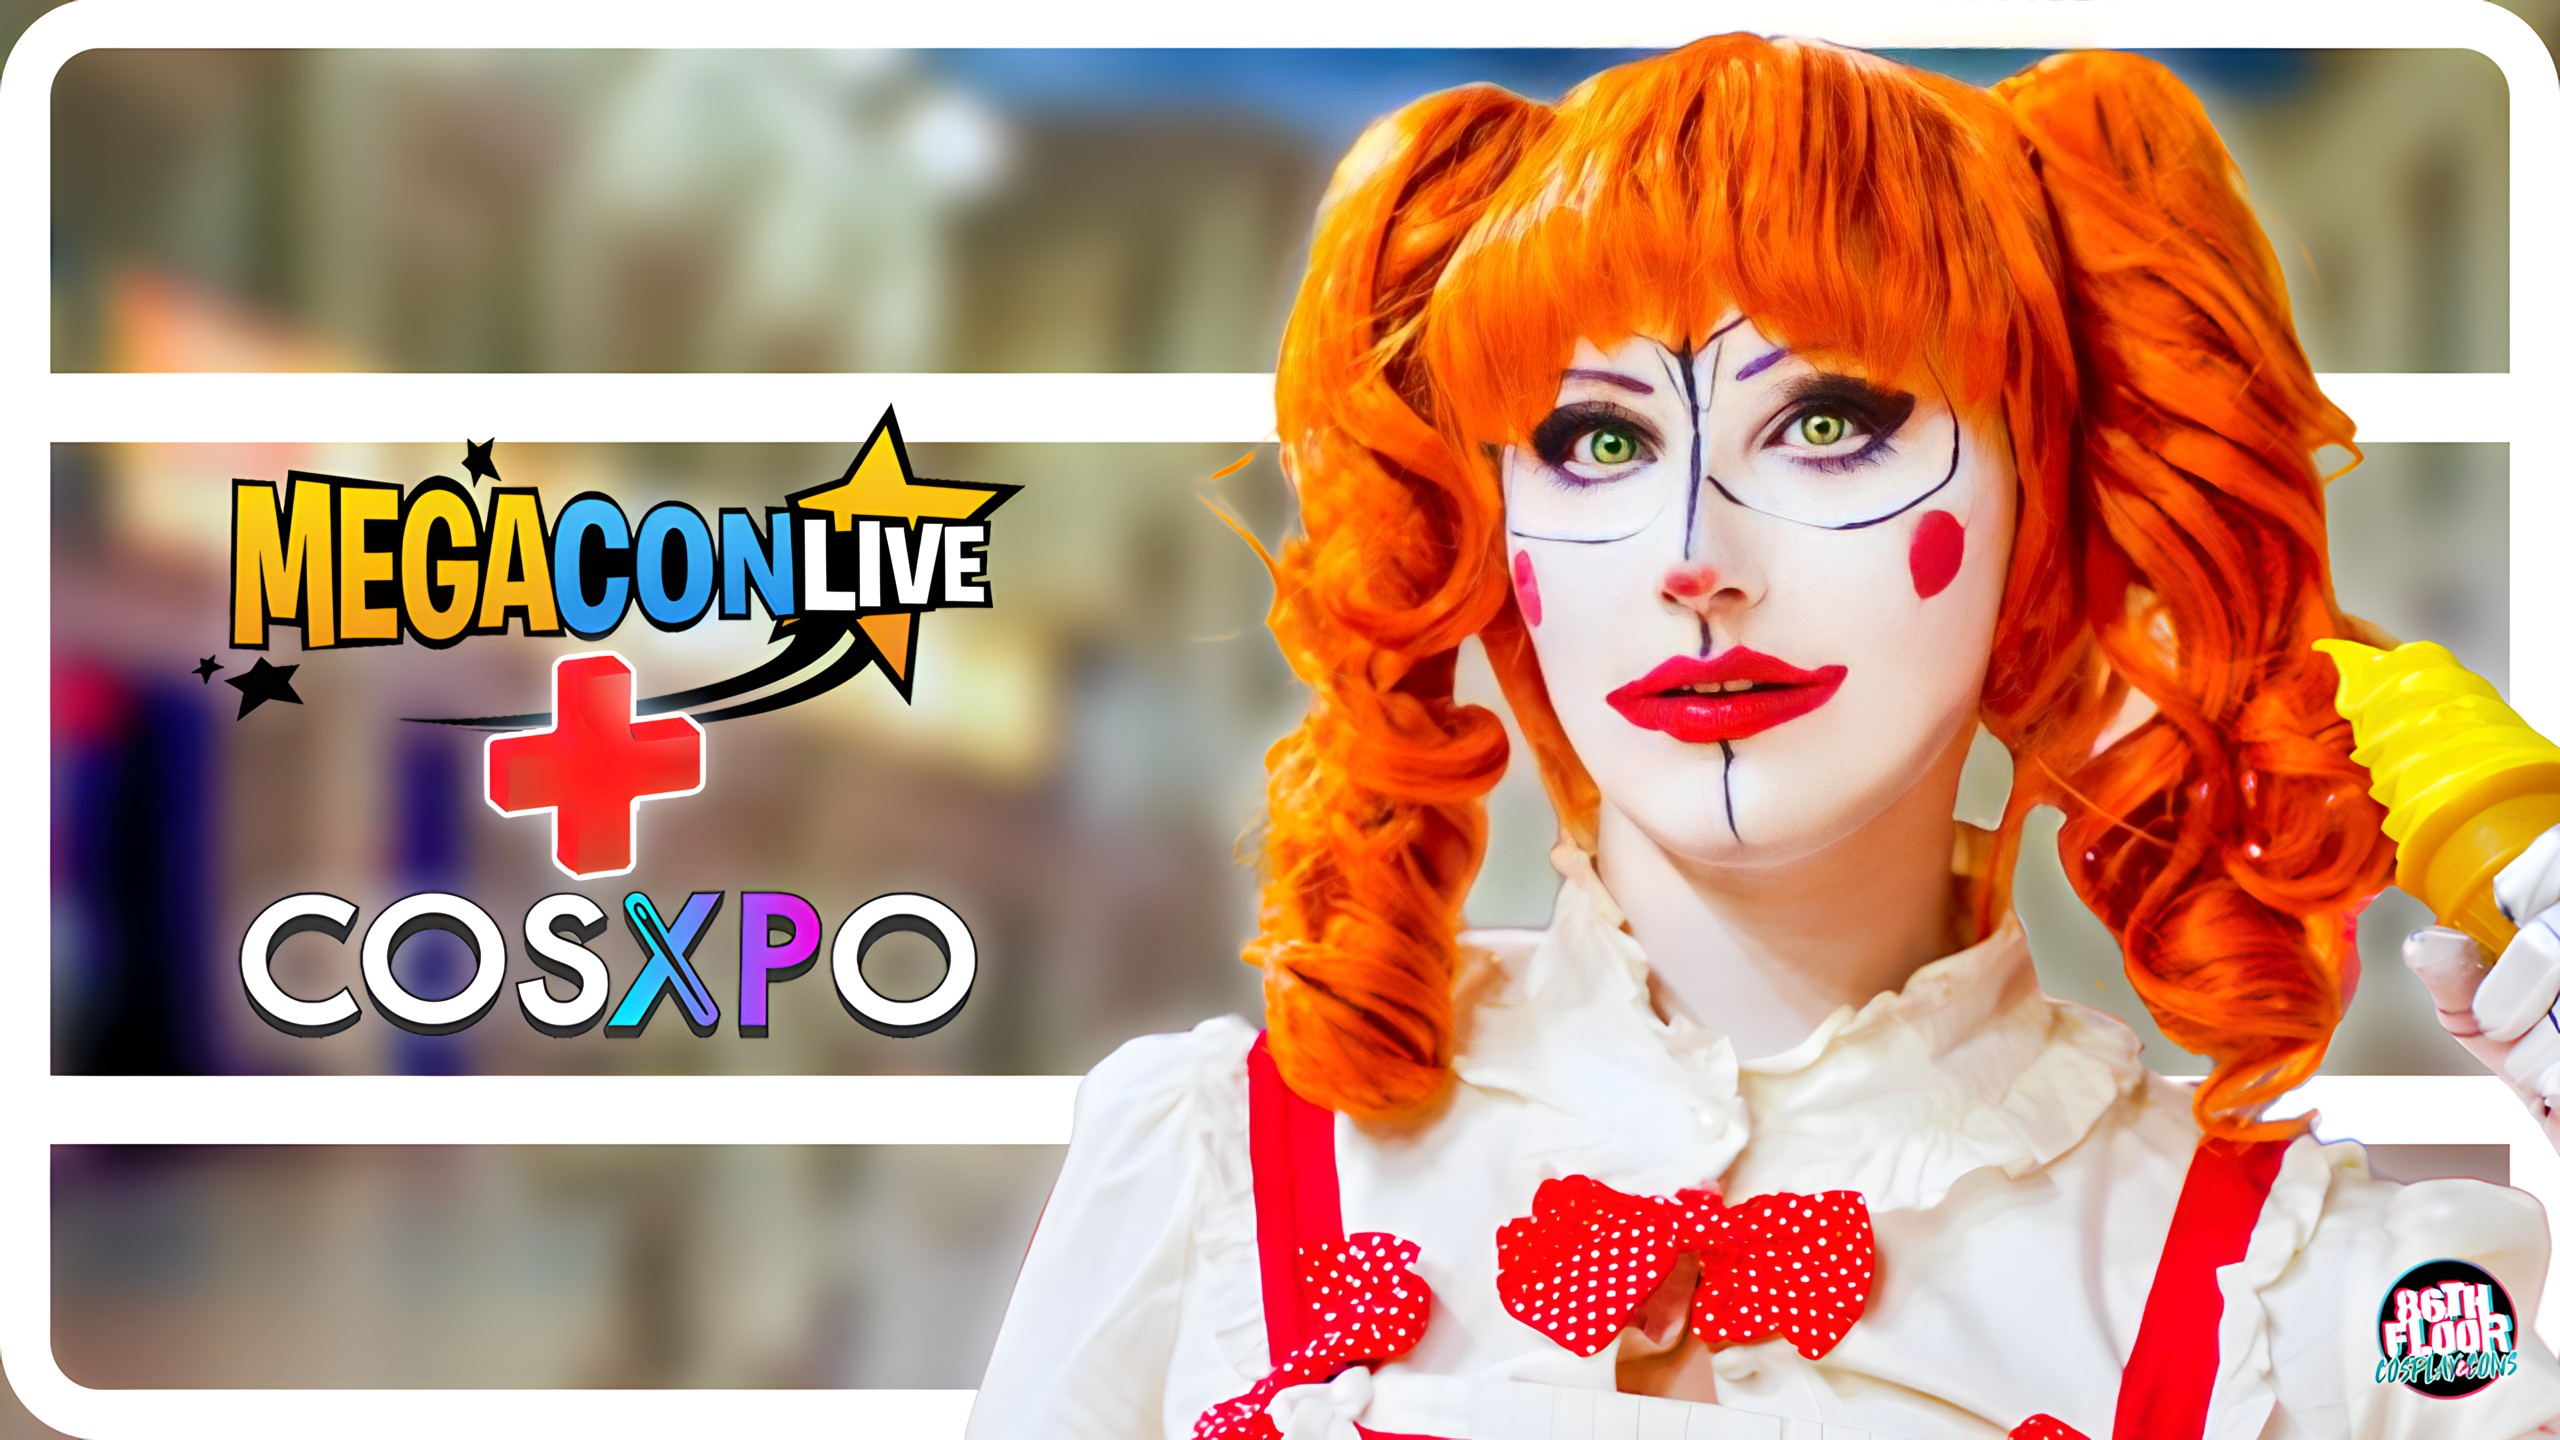 MORE Amazing Megacon and CosXpo Cosplay 2023 – Watch PART TWO of our Megacon CosXpo Cosplay Music Video!!